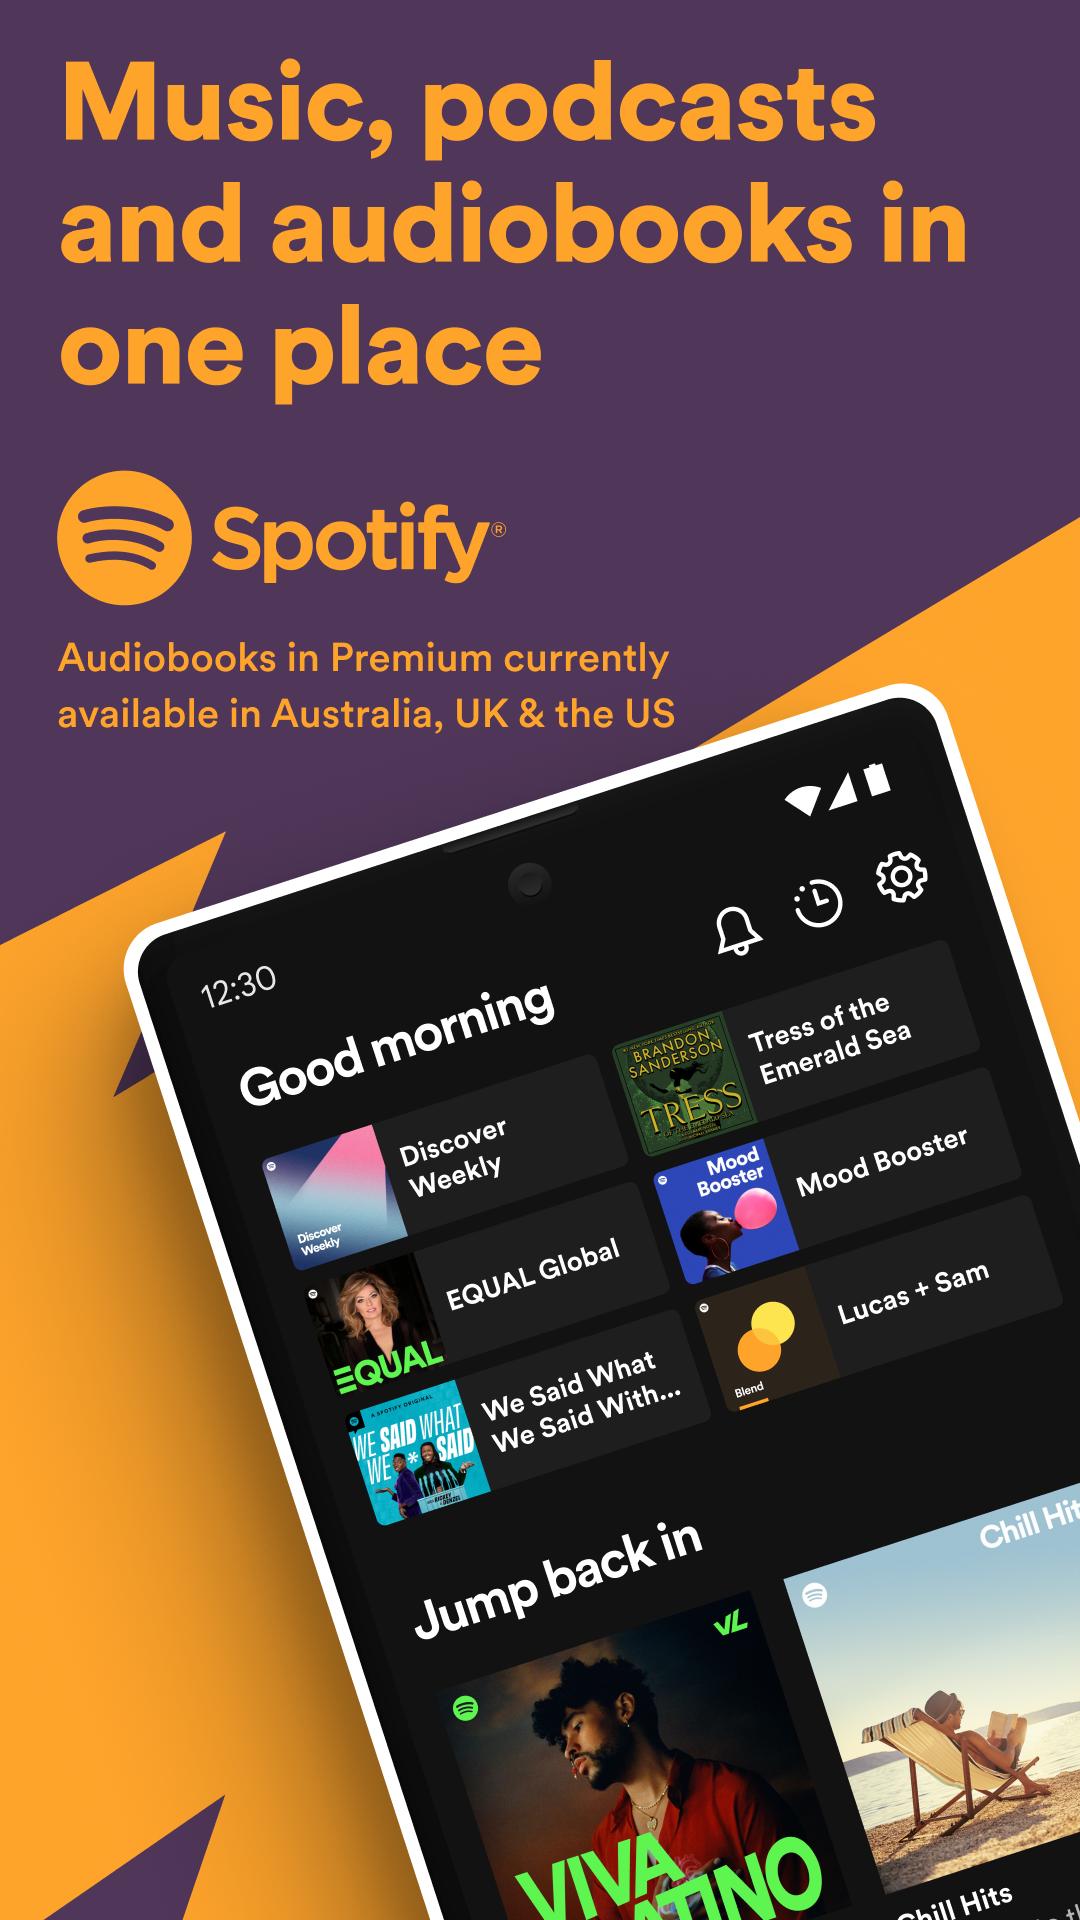 Spotify Premium Mod APK Latest 8.8.96.364 For Android